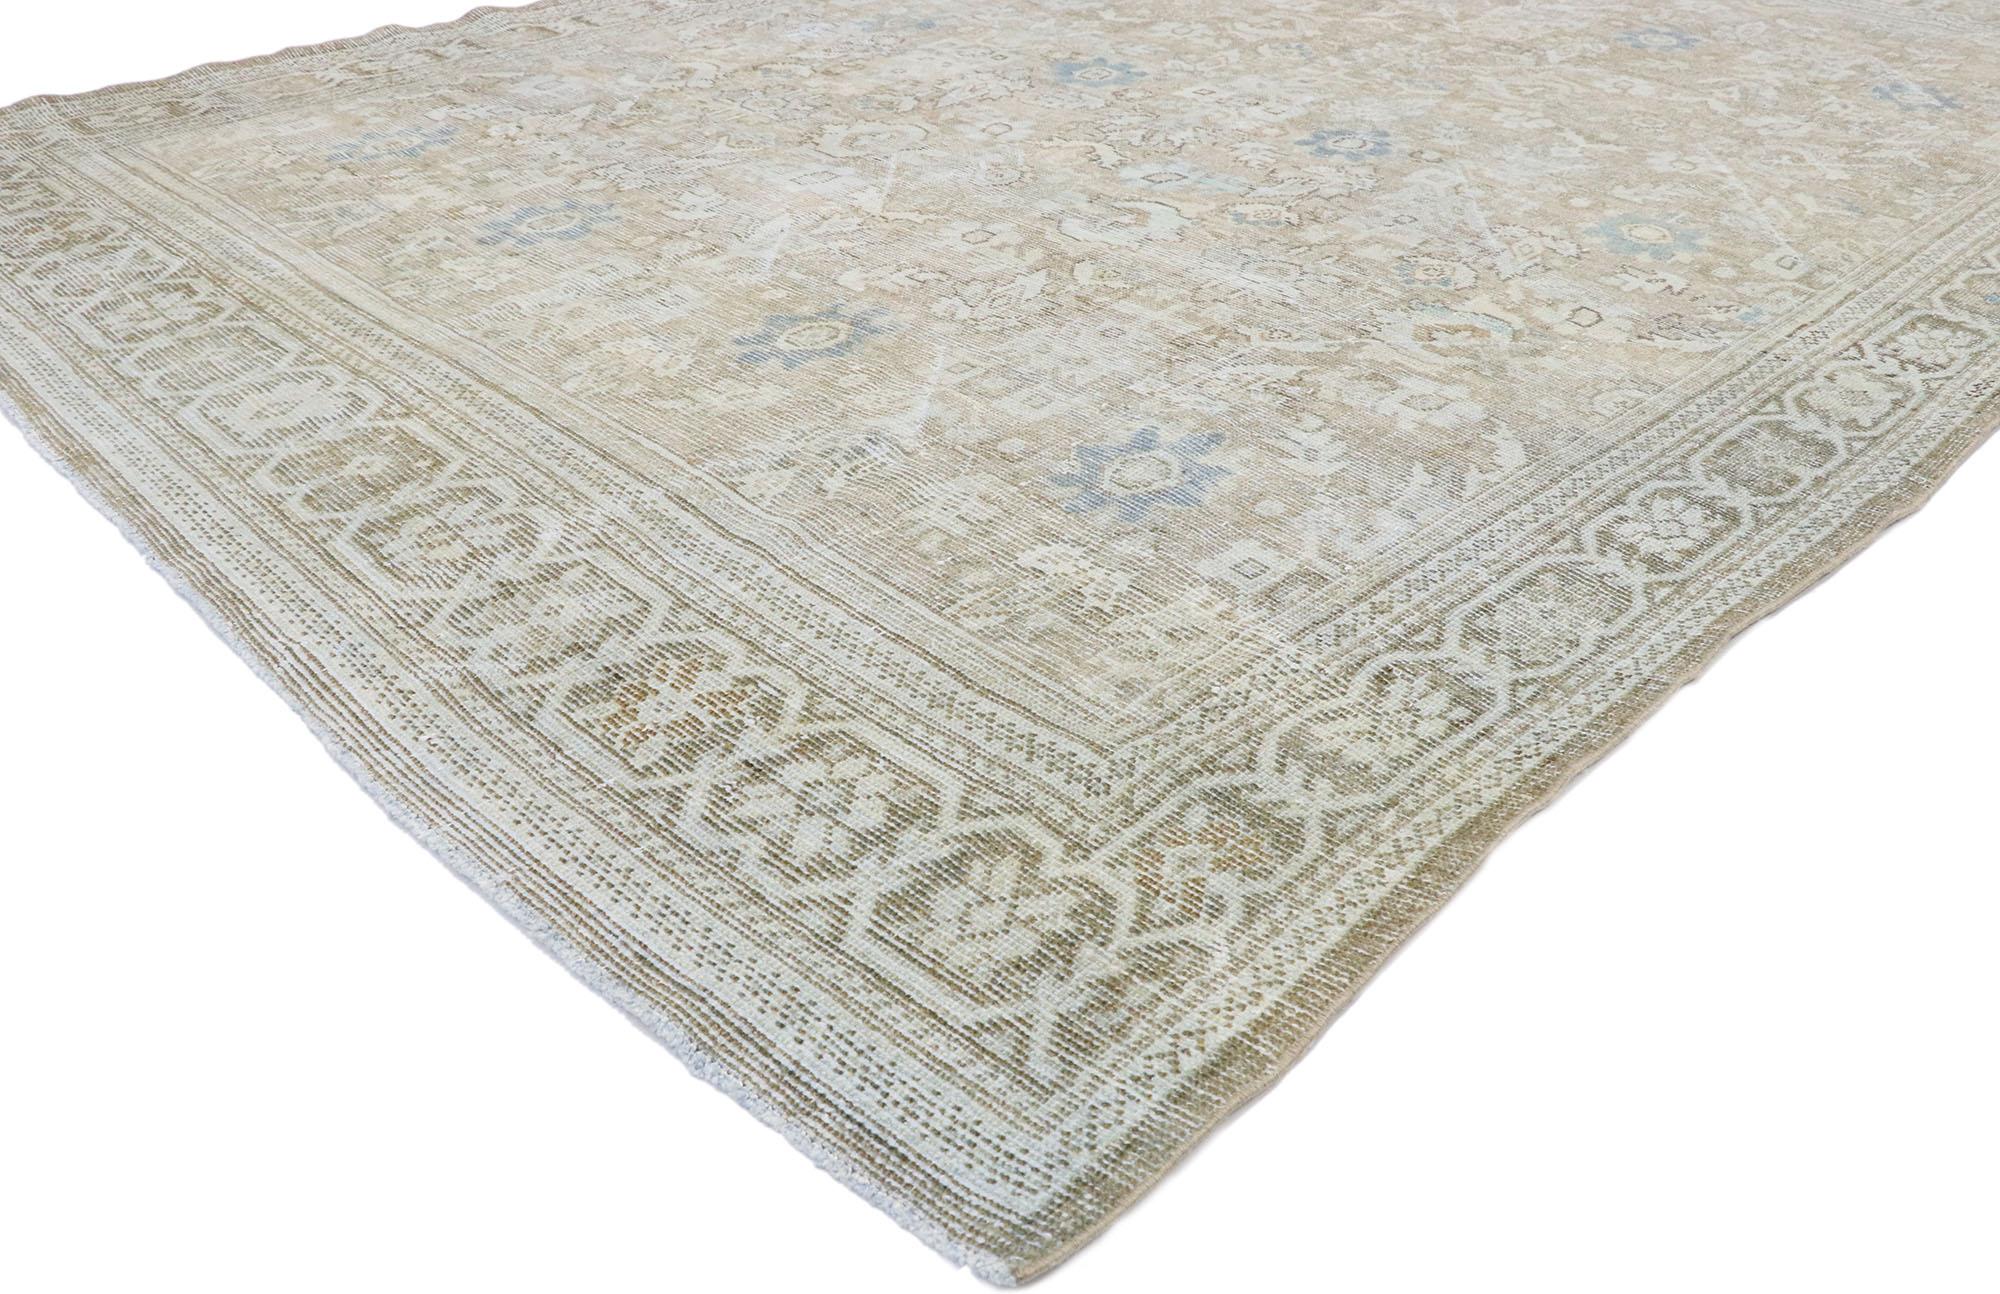 53475, distressed vintage Persian Mahal rug with Rustic Hamptons Cottage style. Understated elegance combined with cool blue hues and warm taupe tones, this hand-knotted wool vintage Persian Mahal rug is poised to impress. The antique washed field